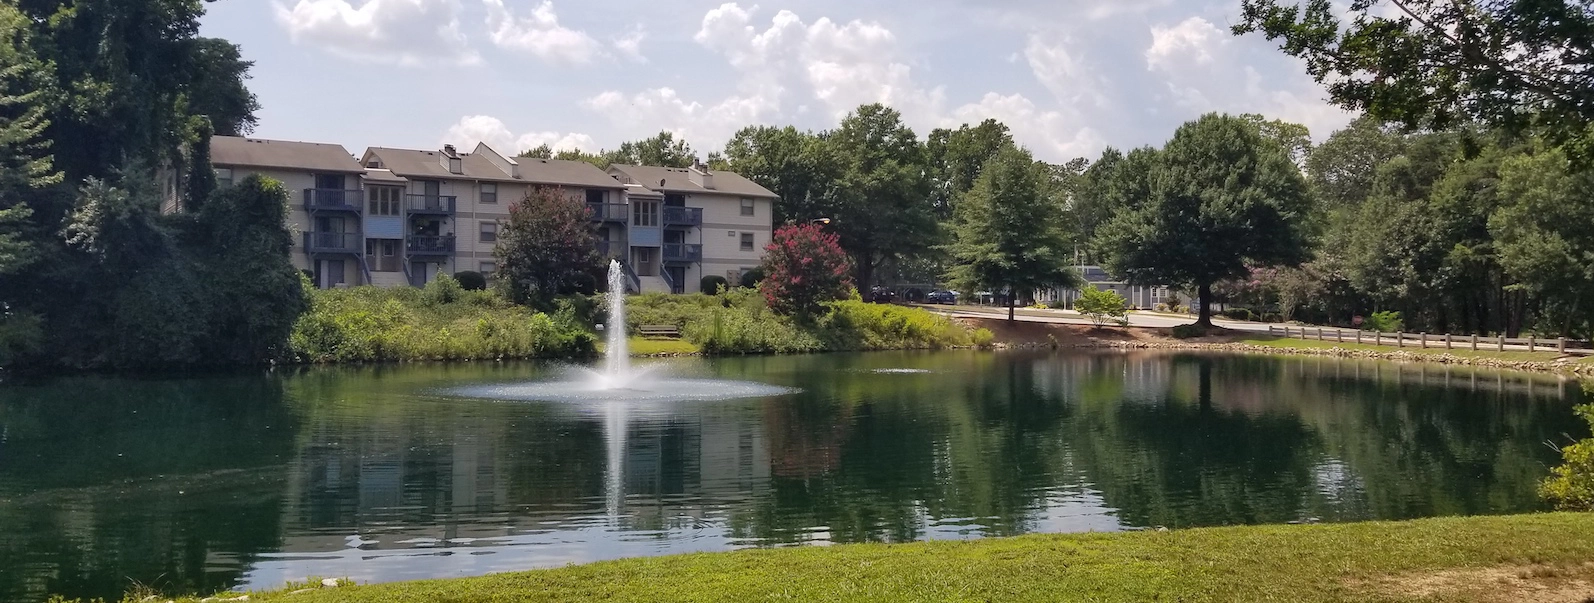 Stormwater Retention Pond maintenance for Communities, Apartment complexes, Hotels and Resorts